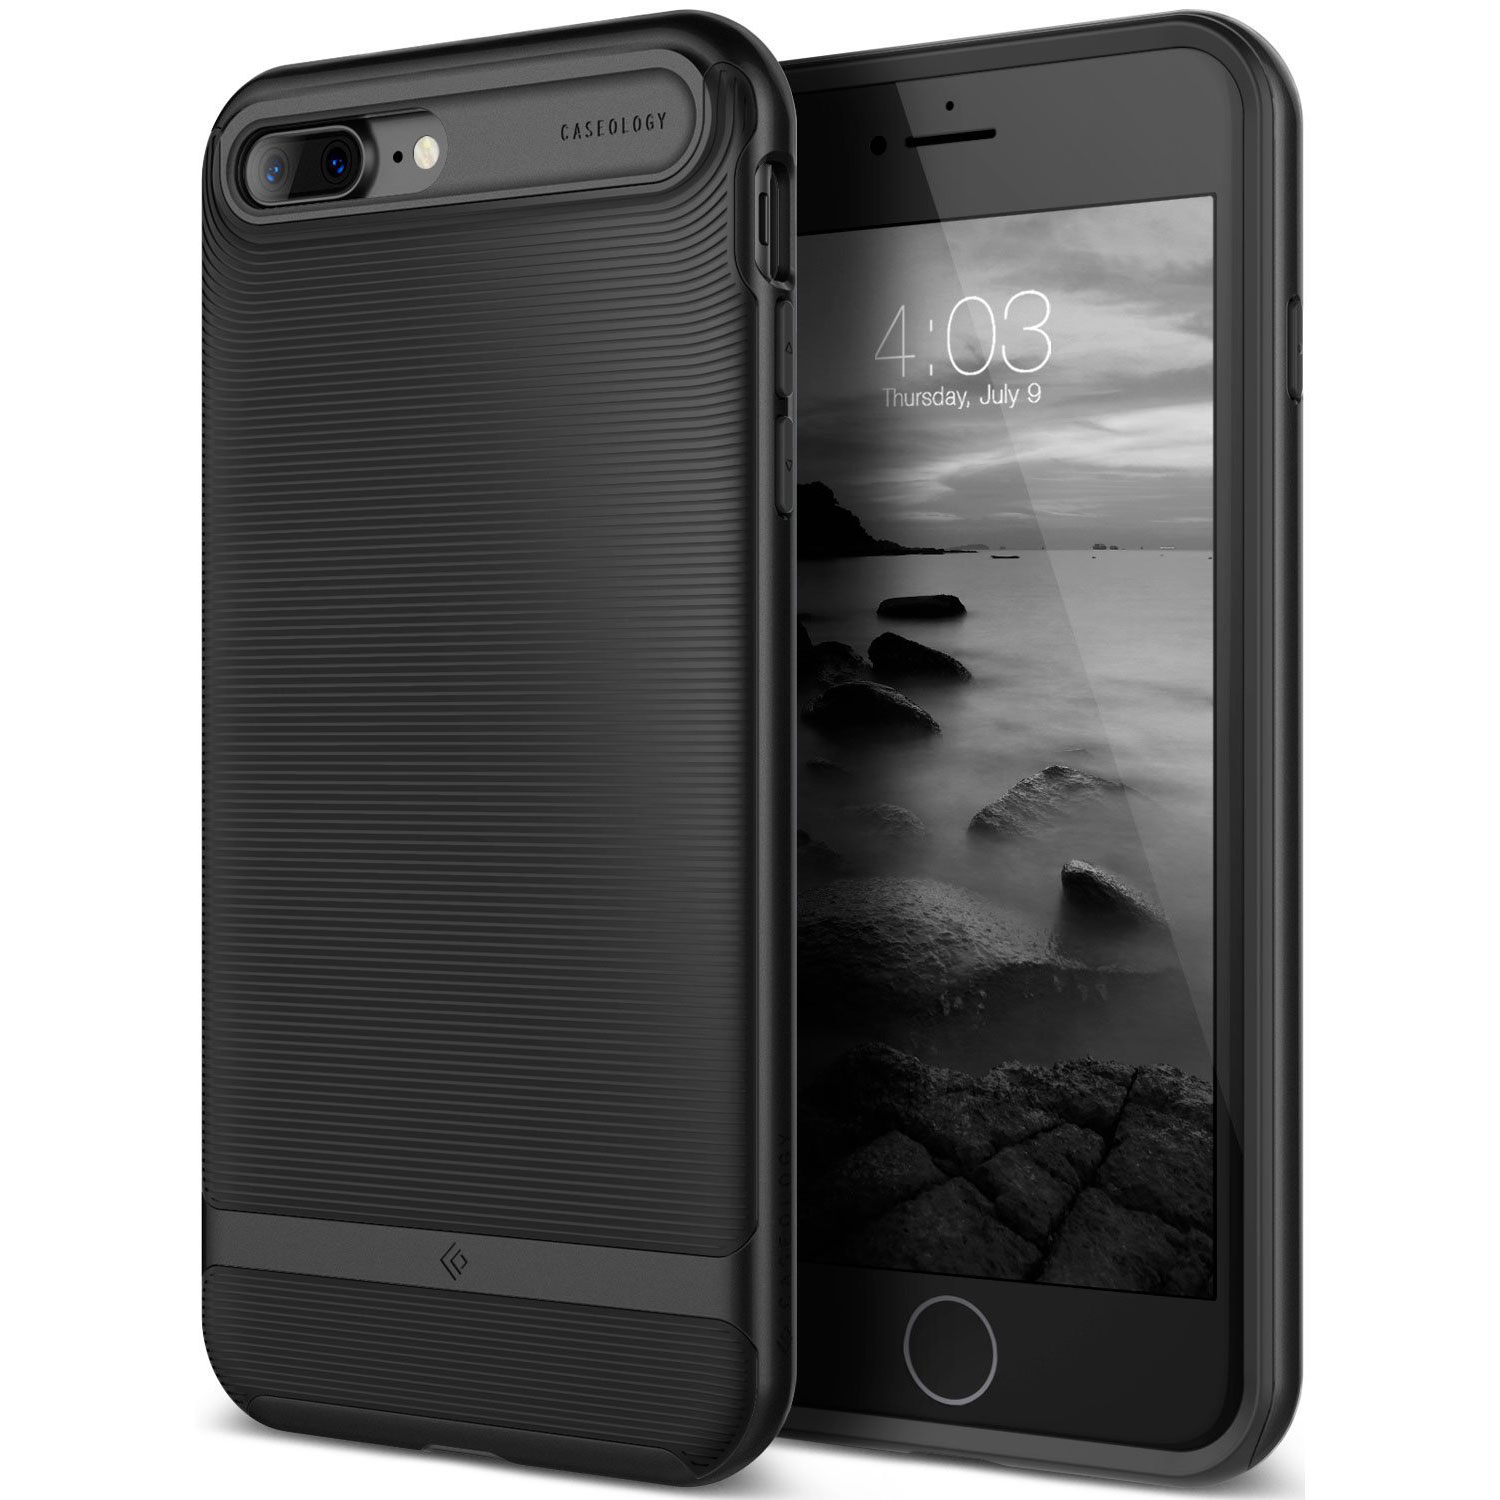 Coque iPhone 7 Plus Caseology Wavelenght Series - Noire